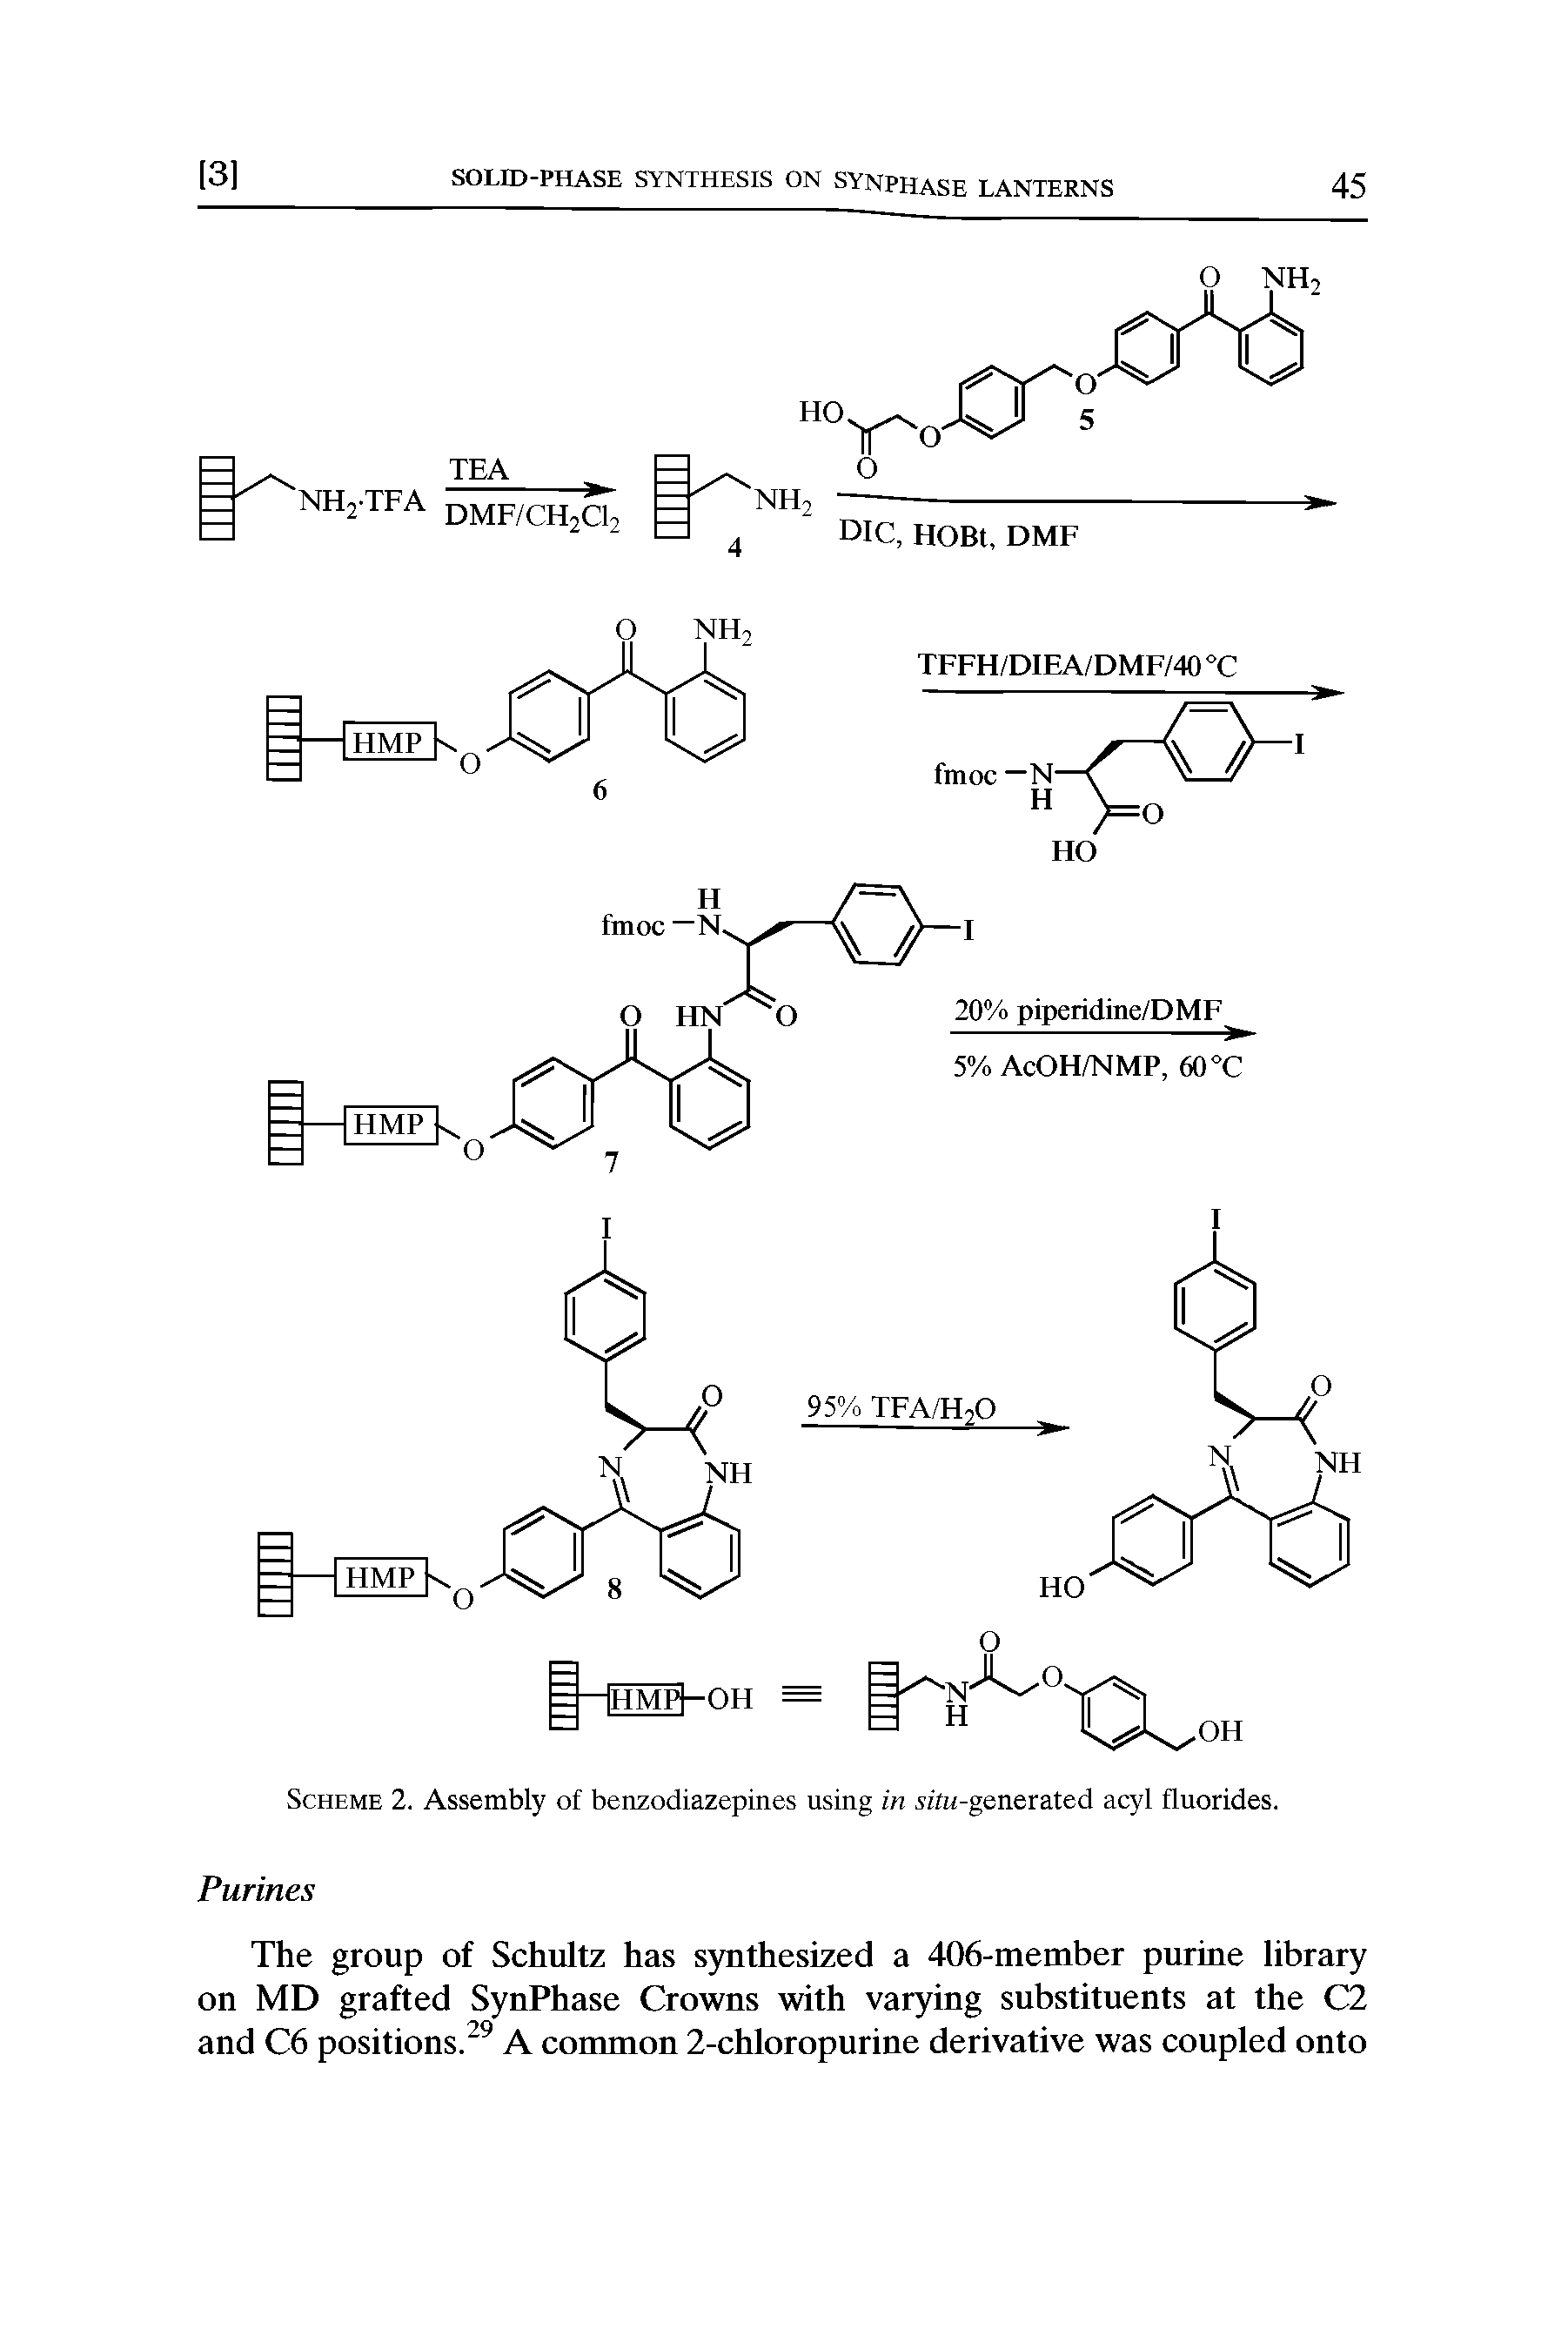 Scheme 2. Assembly of benzodiazepines using in situ-generated acyl fluorides.